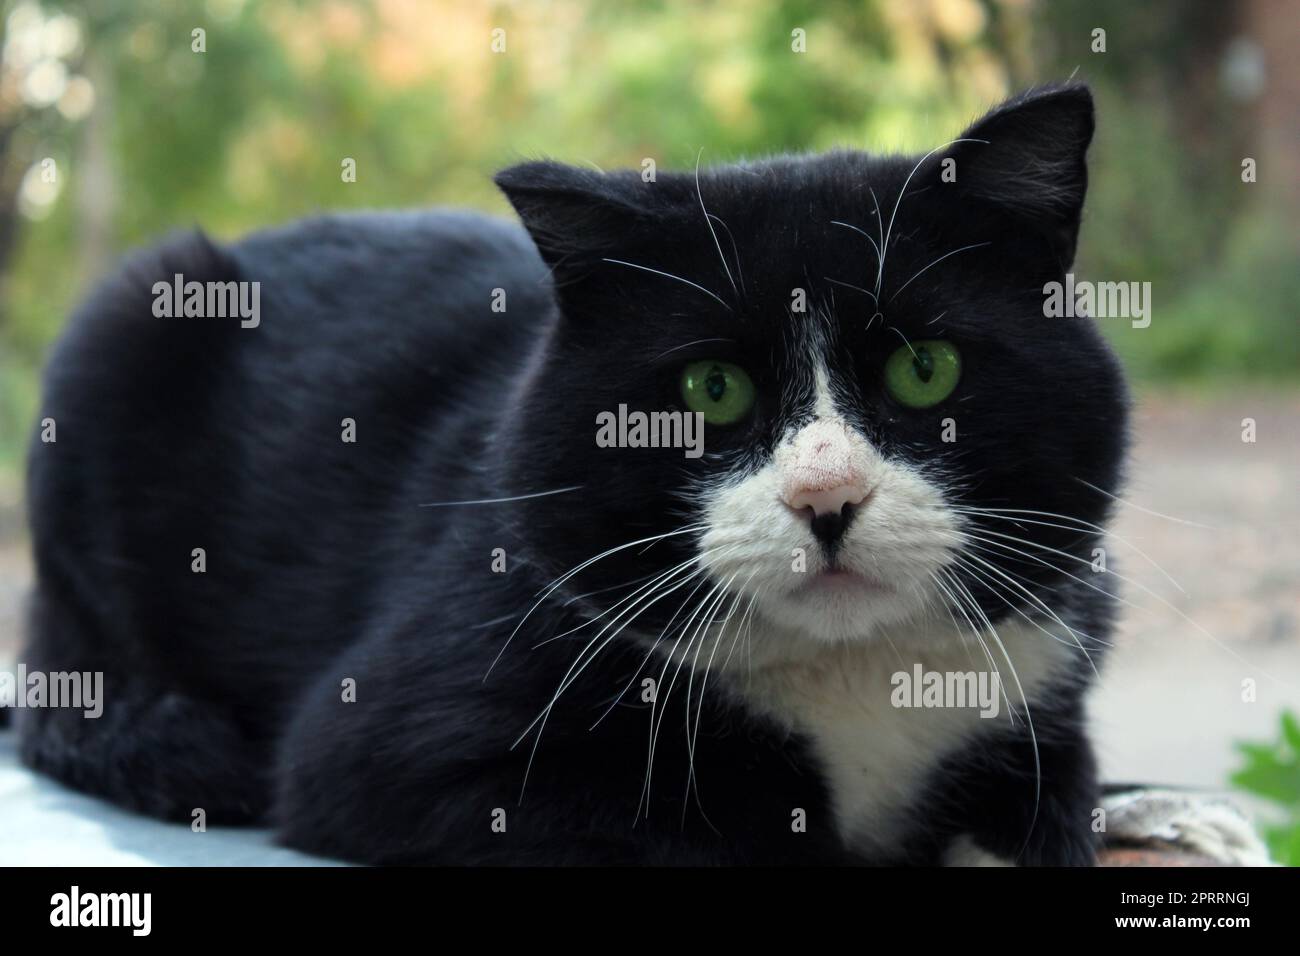 A large black cat with a white muzzle and green eyes close-up looks straight ahead. Stock Photo